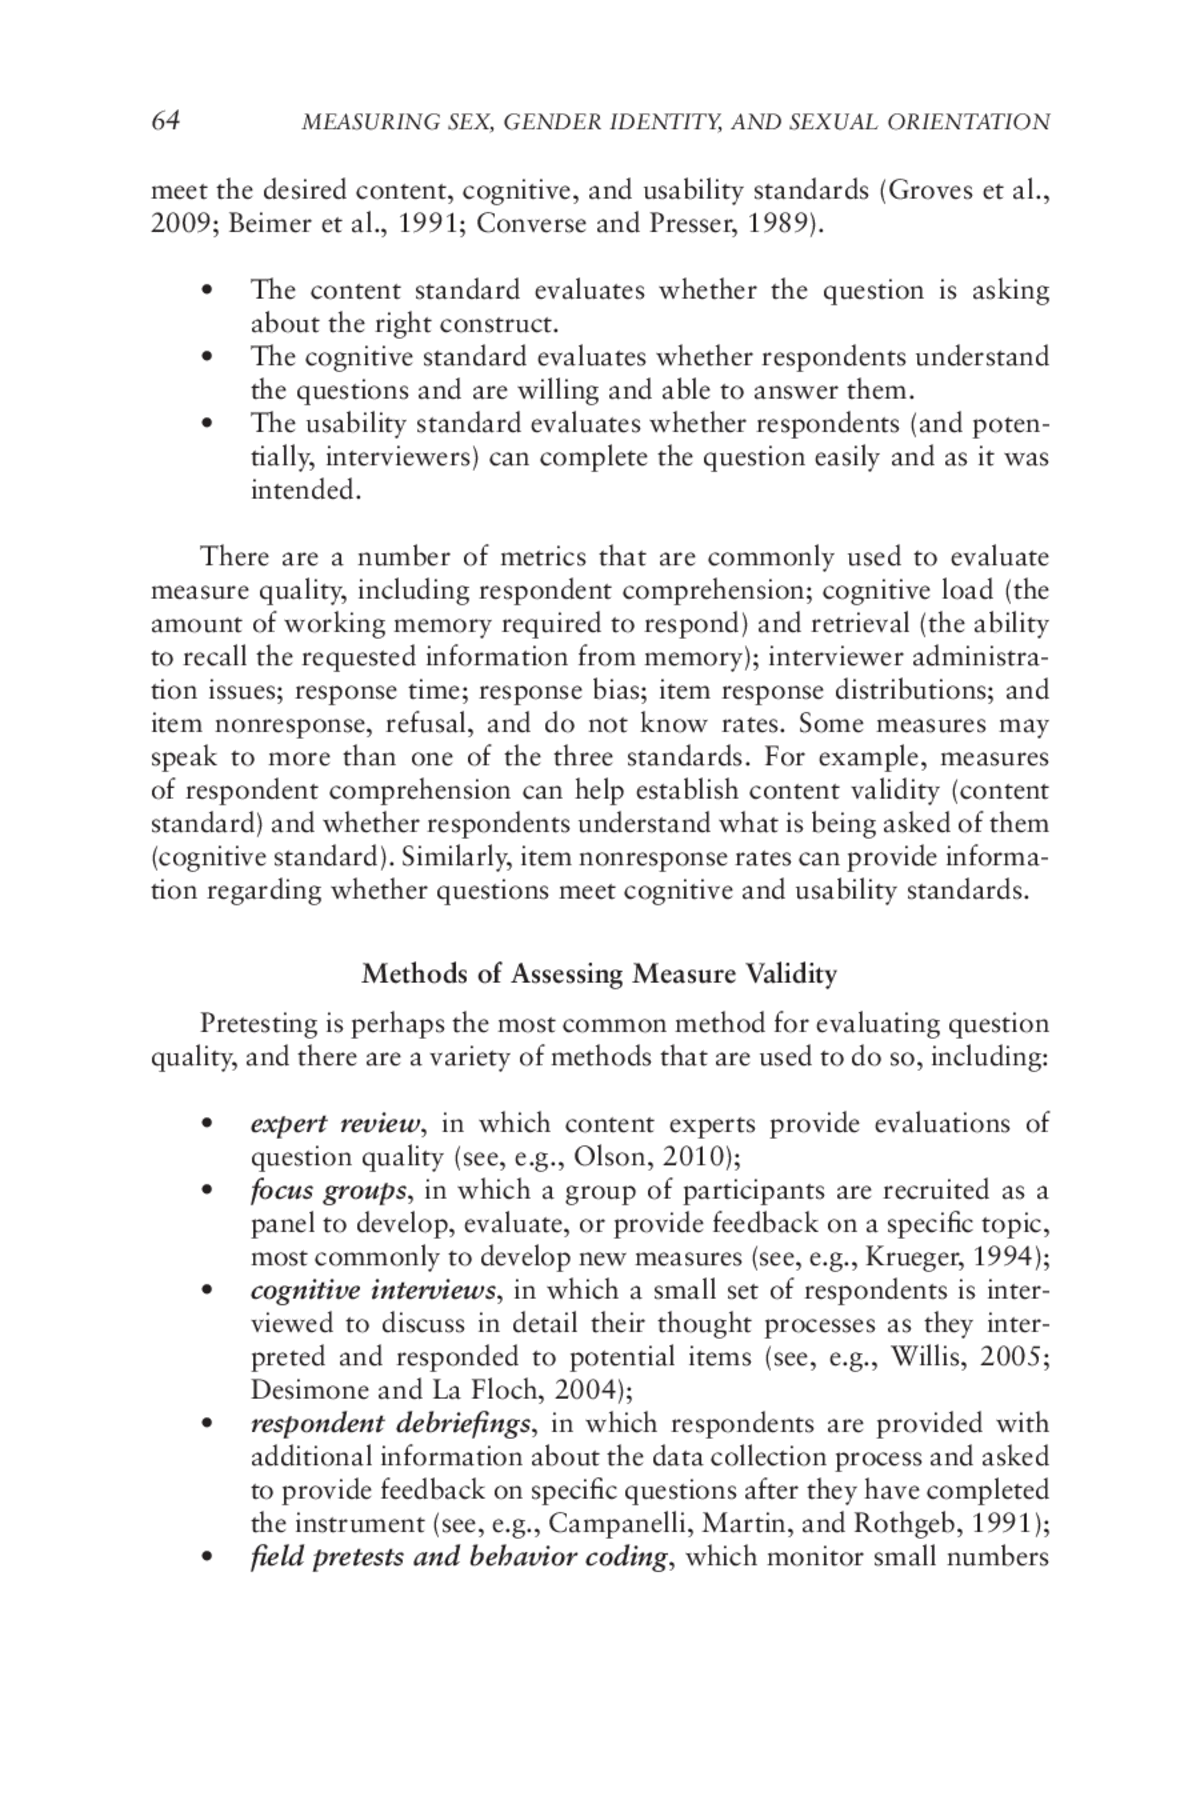 4 Scientific Criteria For Recommended Measures Measuring Sex Gender Identity And Sexual 5199